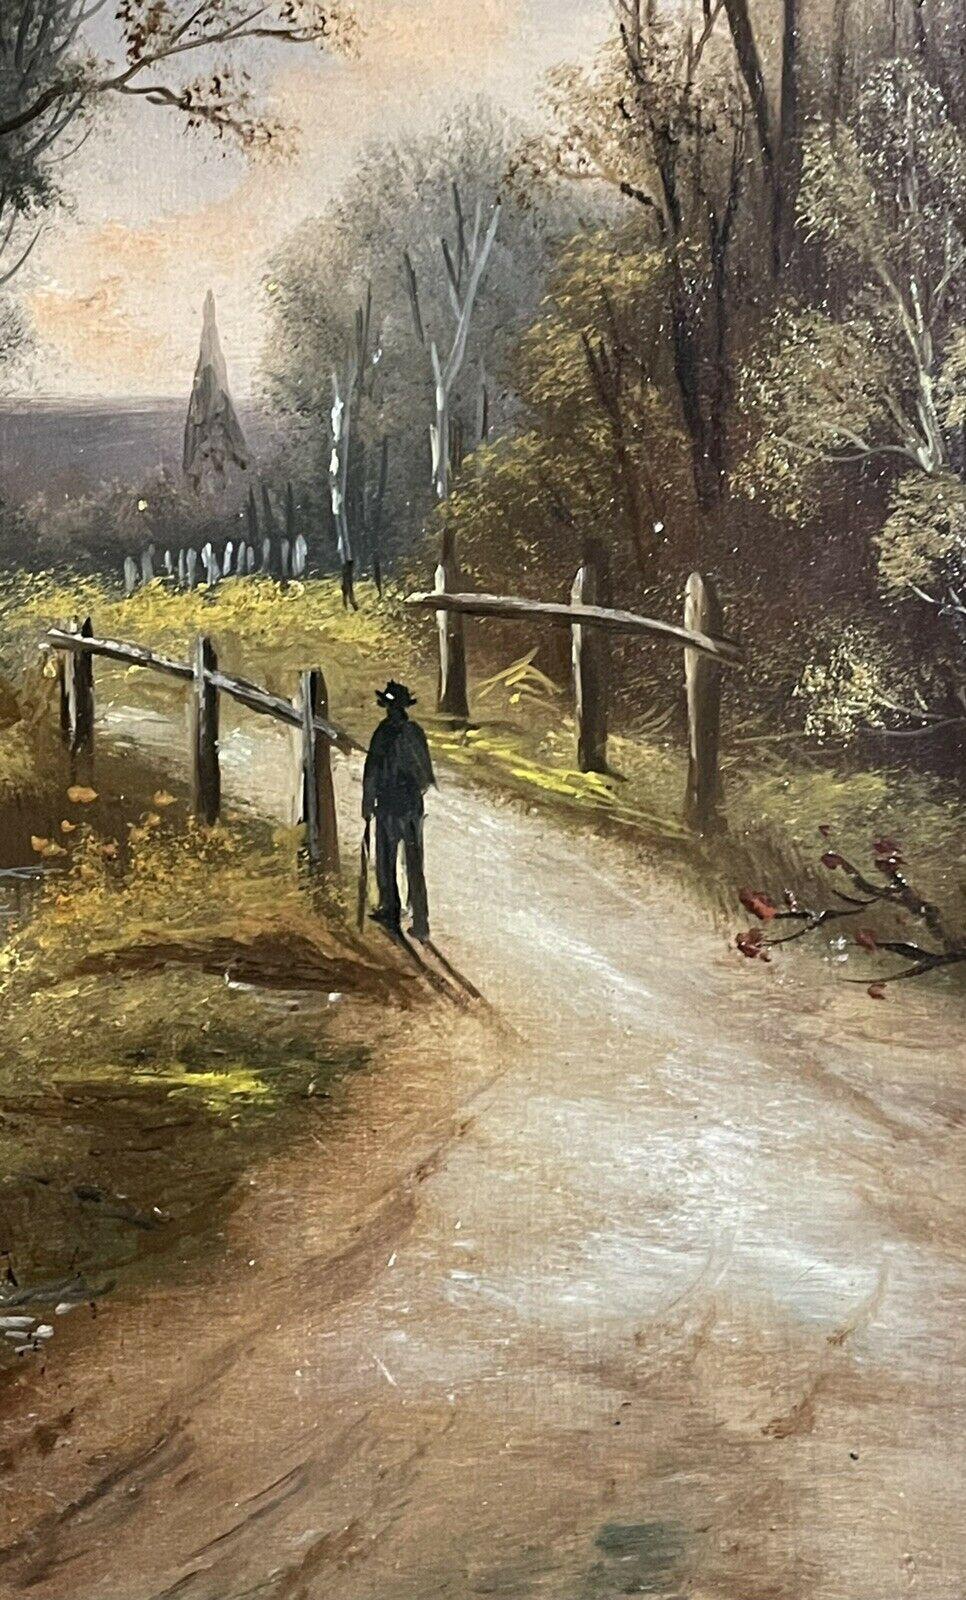 SIGNED VICTORIAN OIL PAINTING - FIGURE WALKING ALONG COUNTRY RURAL LANE - FRAMED 2